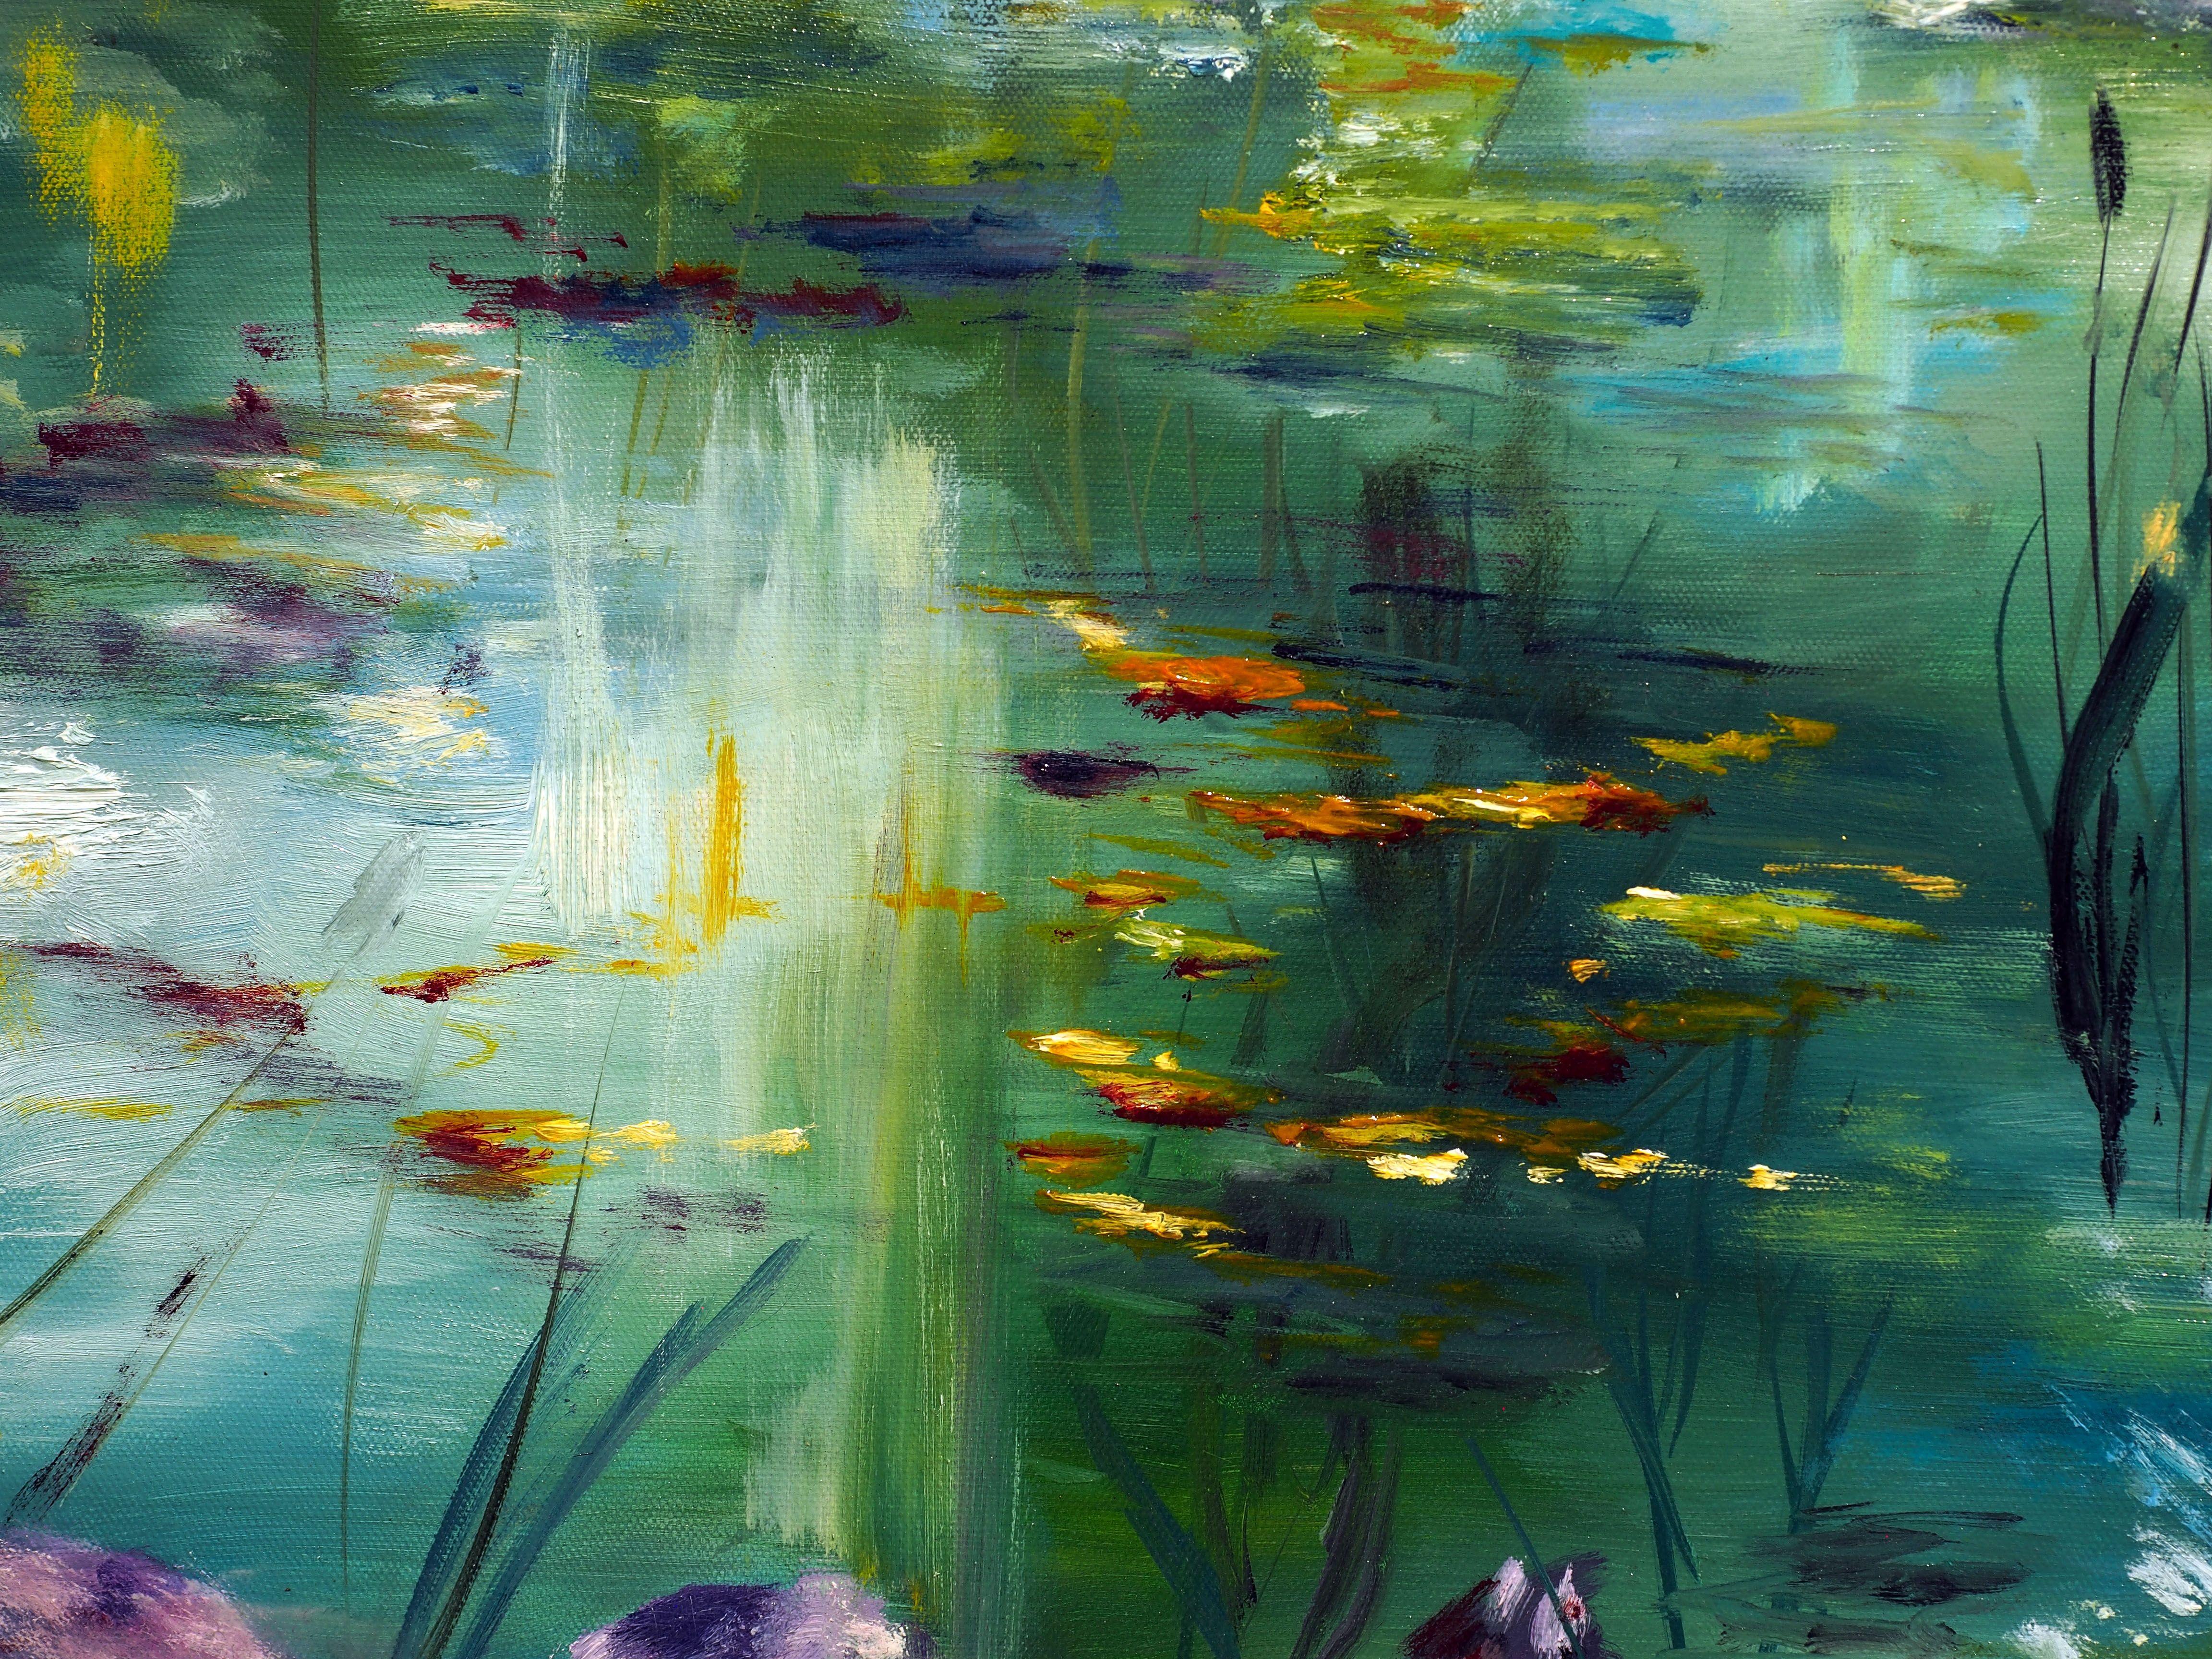 This is an original one of a kind piece featuring the pond with water lilies and fishes swimming in the water. Monet inspired piece, the artist uses unique technique to bring this work to life with thick layers of paint creating texture in this